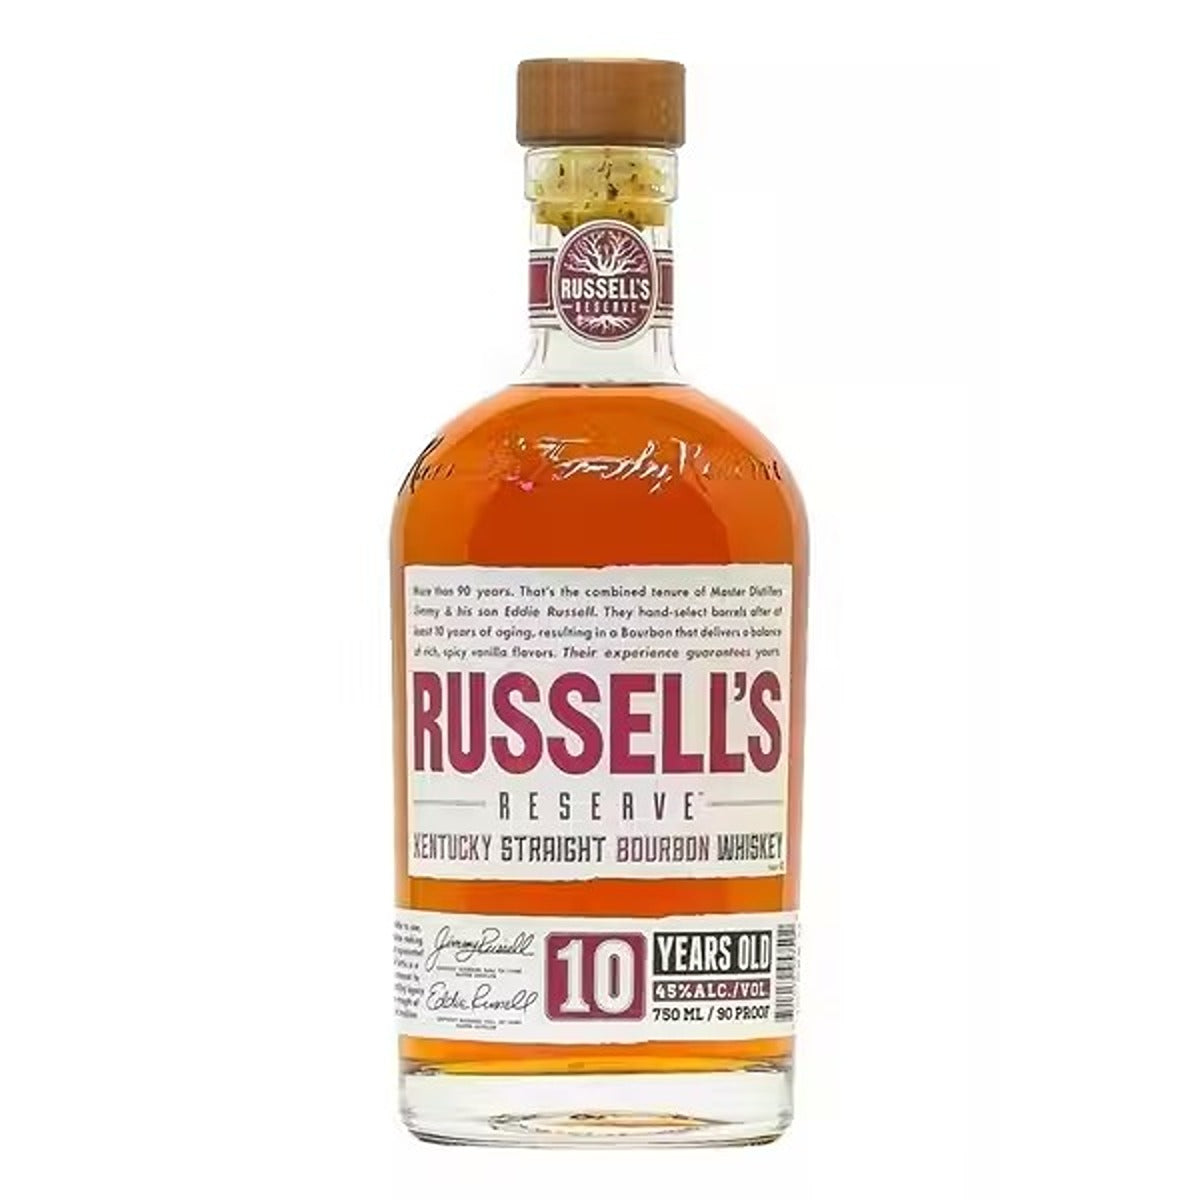 RUSSELL'S RESERVE 10 YEAR 750ML